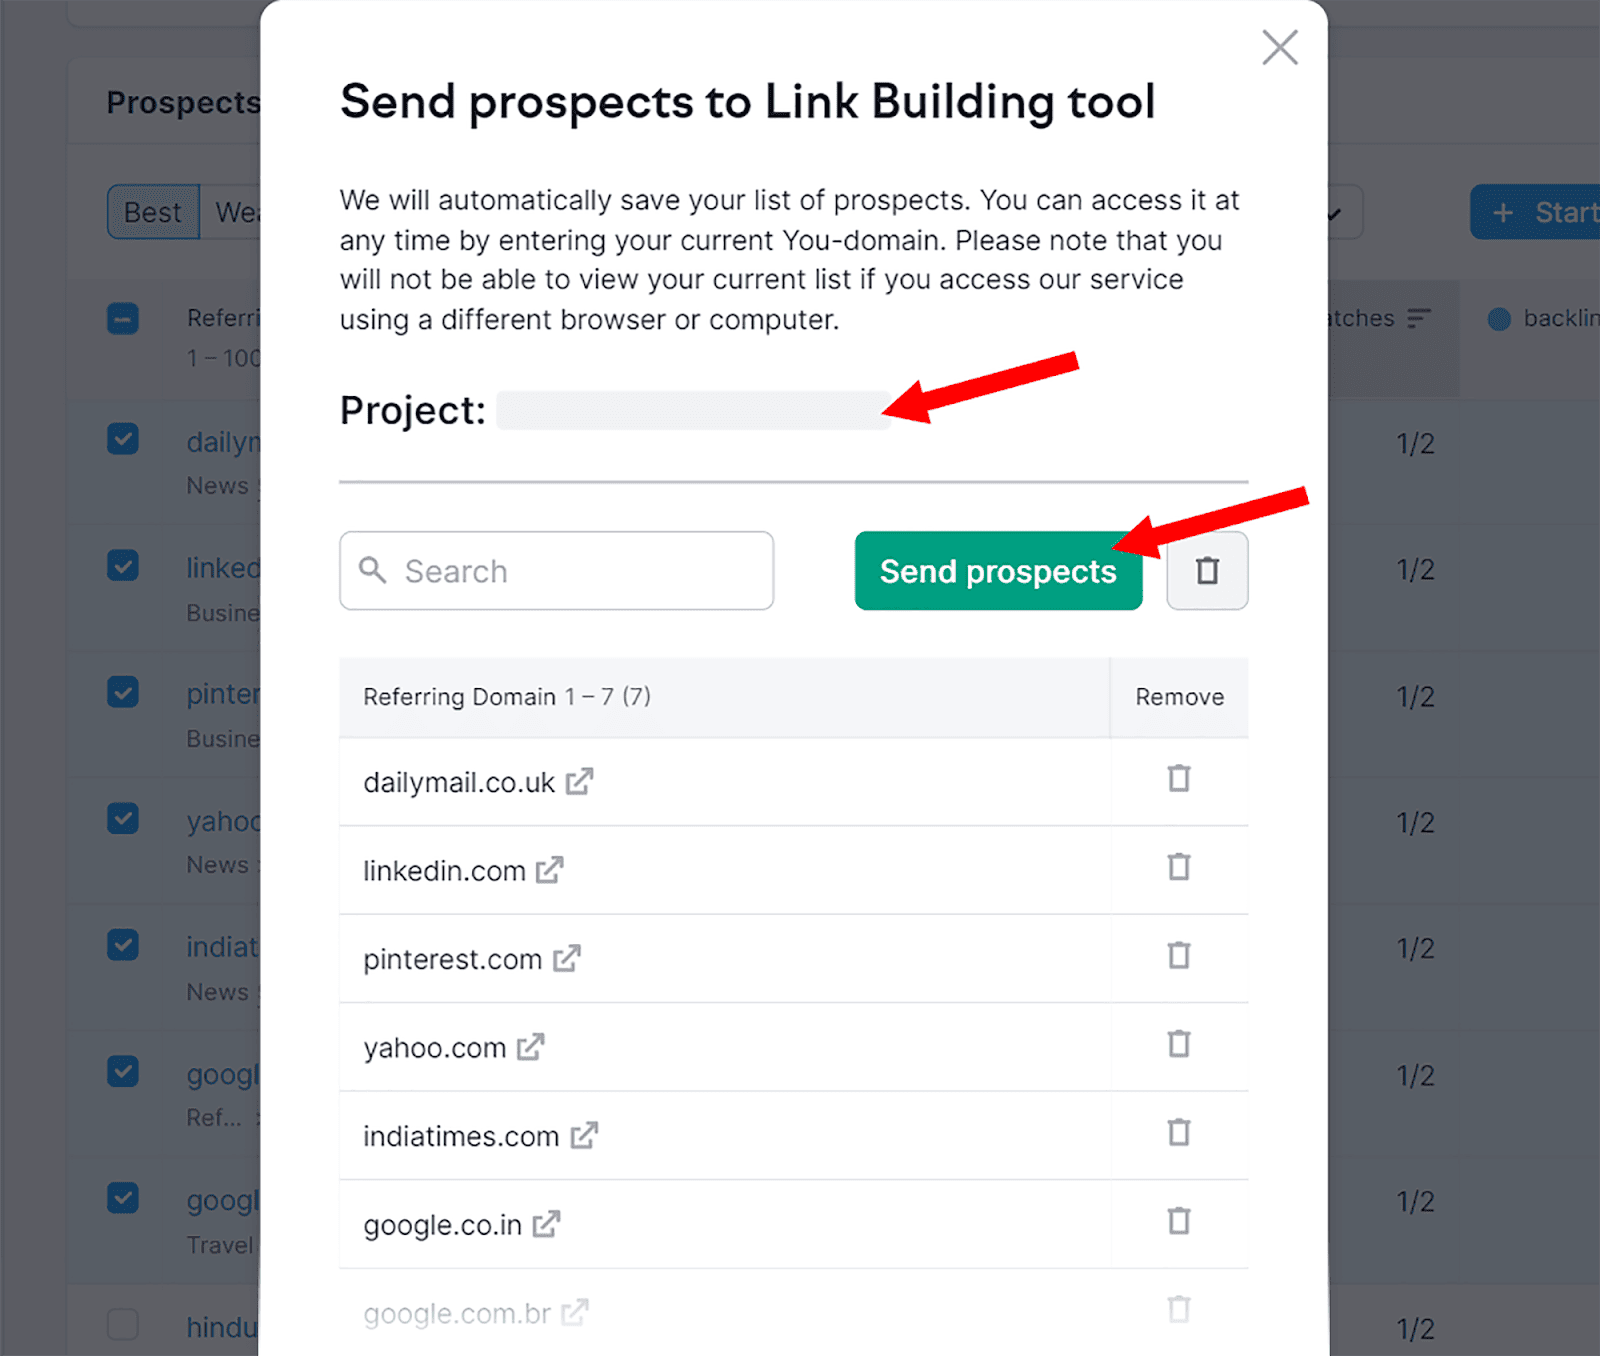 Prospects saved to link building tool